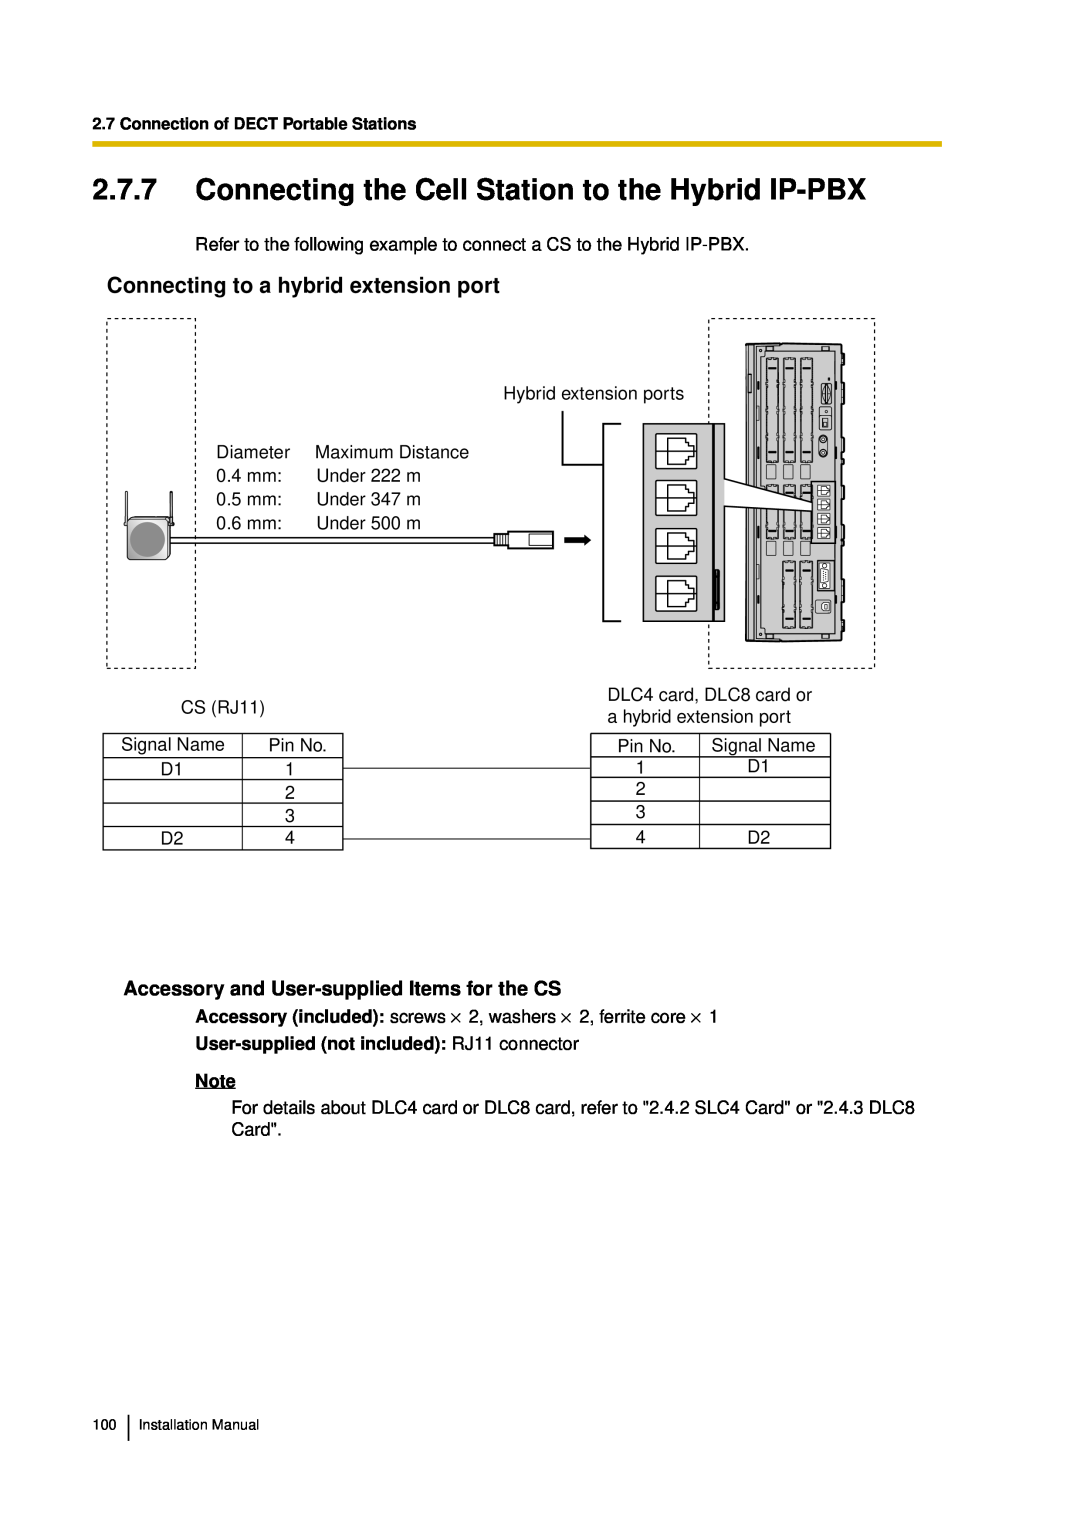 Panasonic KX-TDA30 installation manual Connecting to a hybrid extension port, Accessory and User-suppliedItems for the CS 